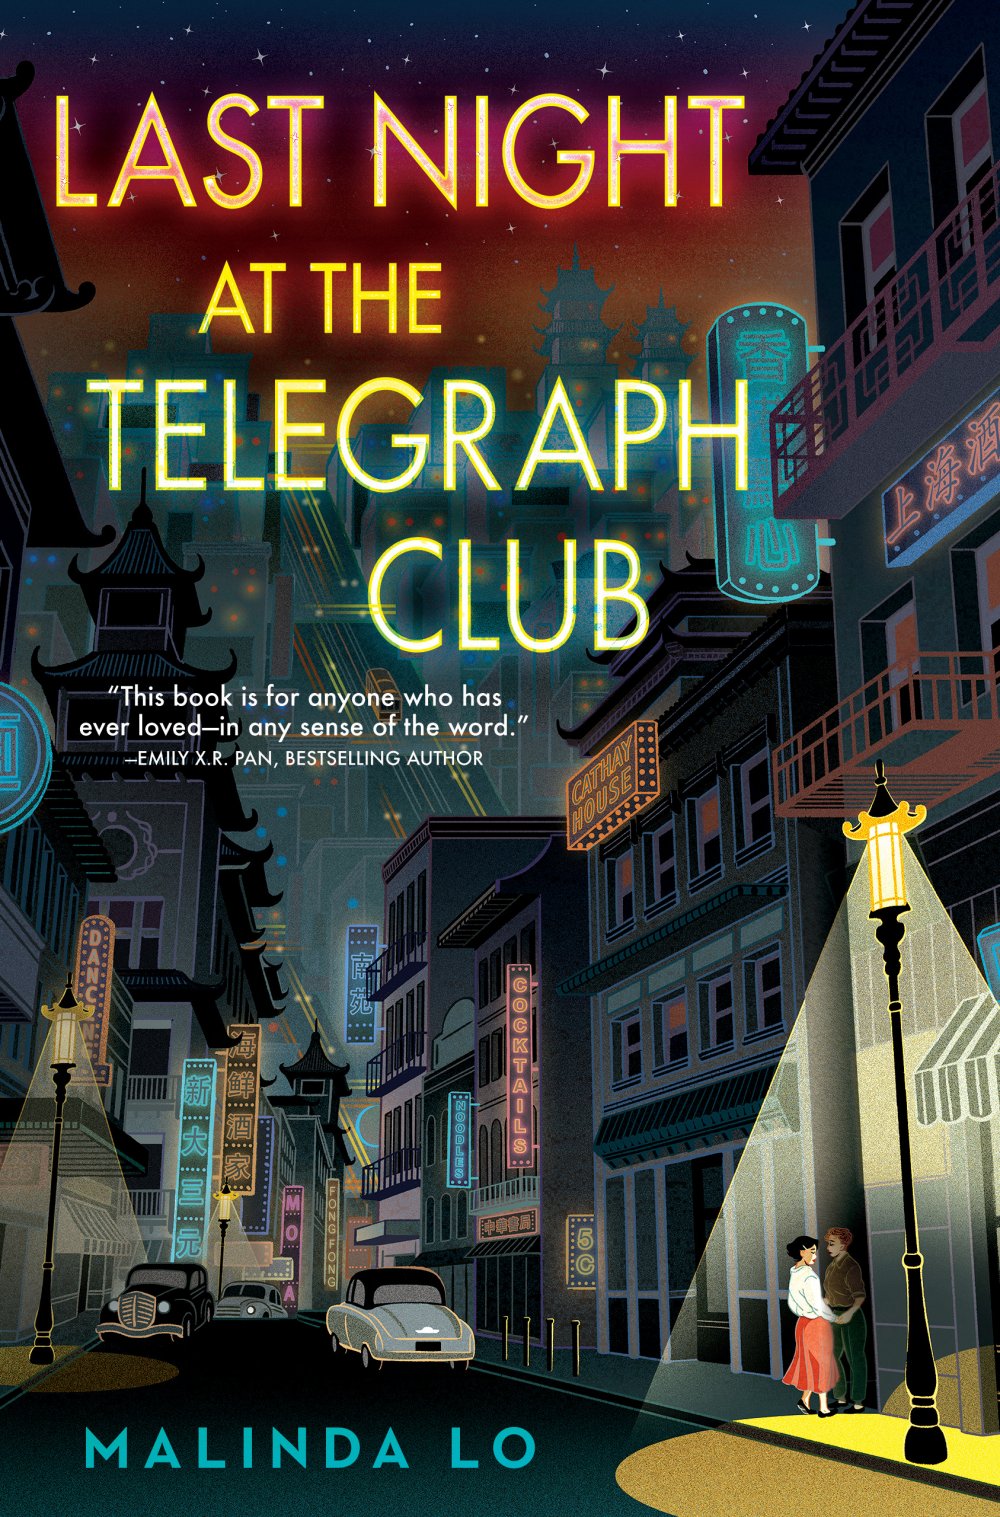 the last night at the telegraph club